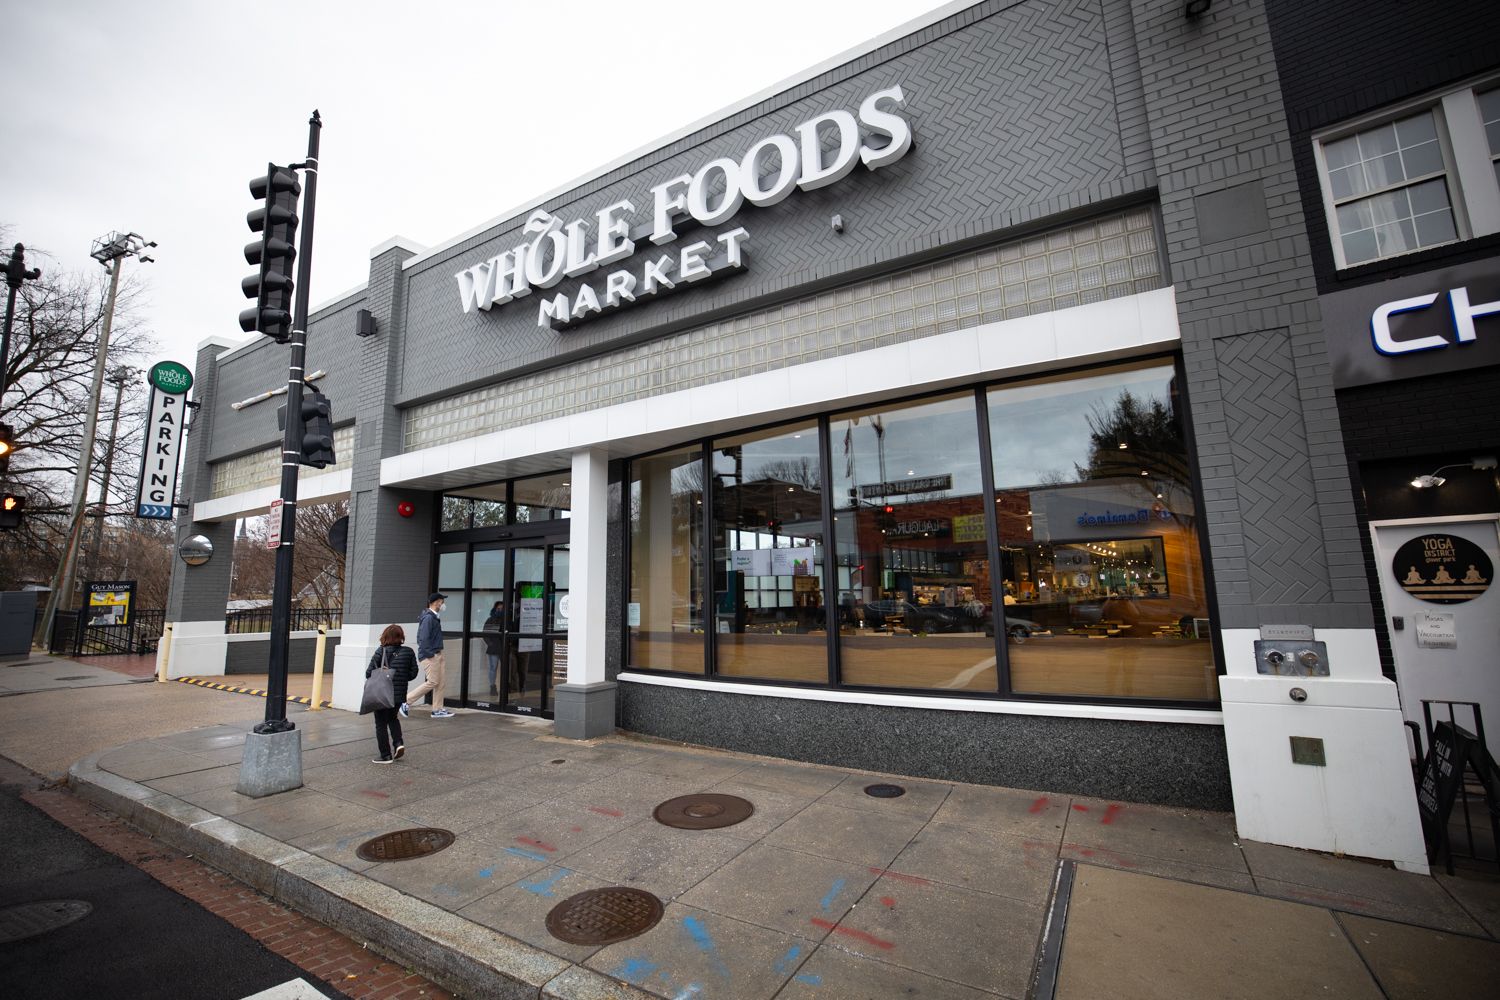 Nearby Whole Foods market in Cathedral Heights